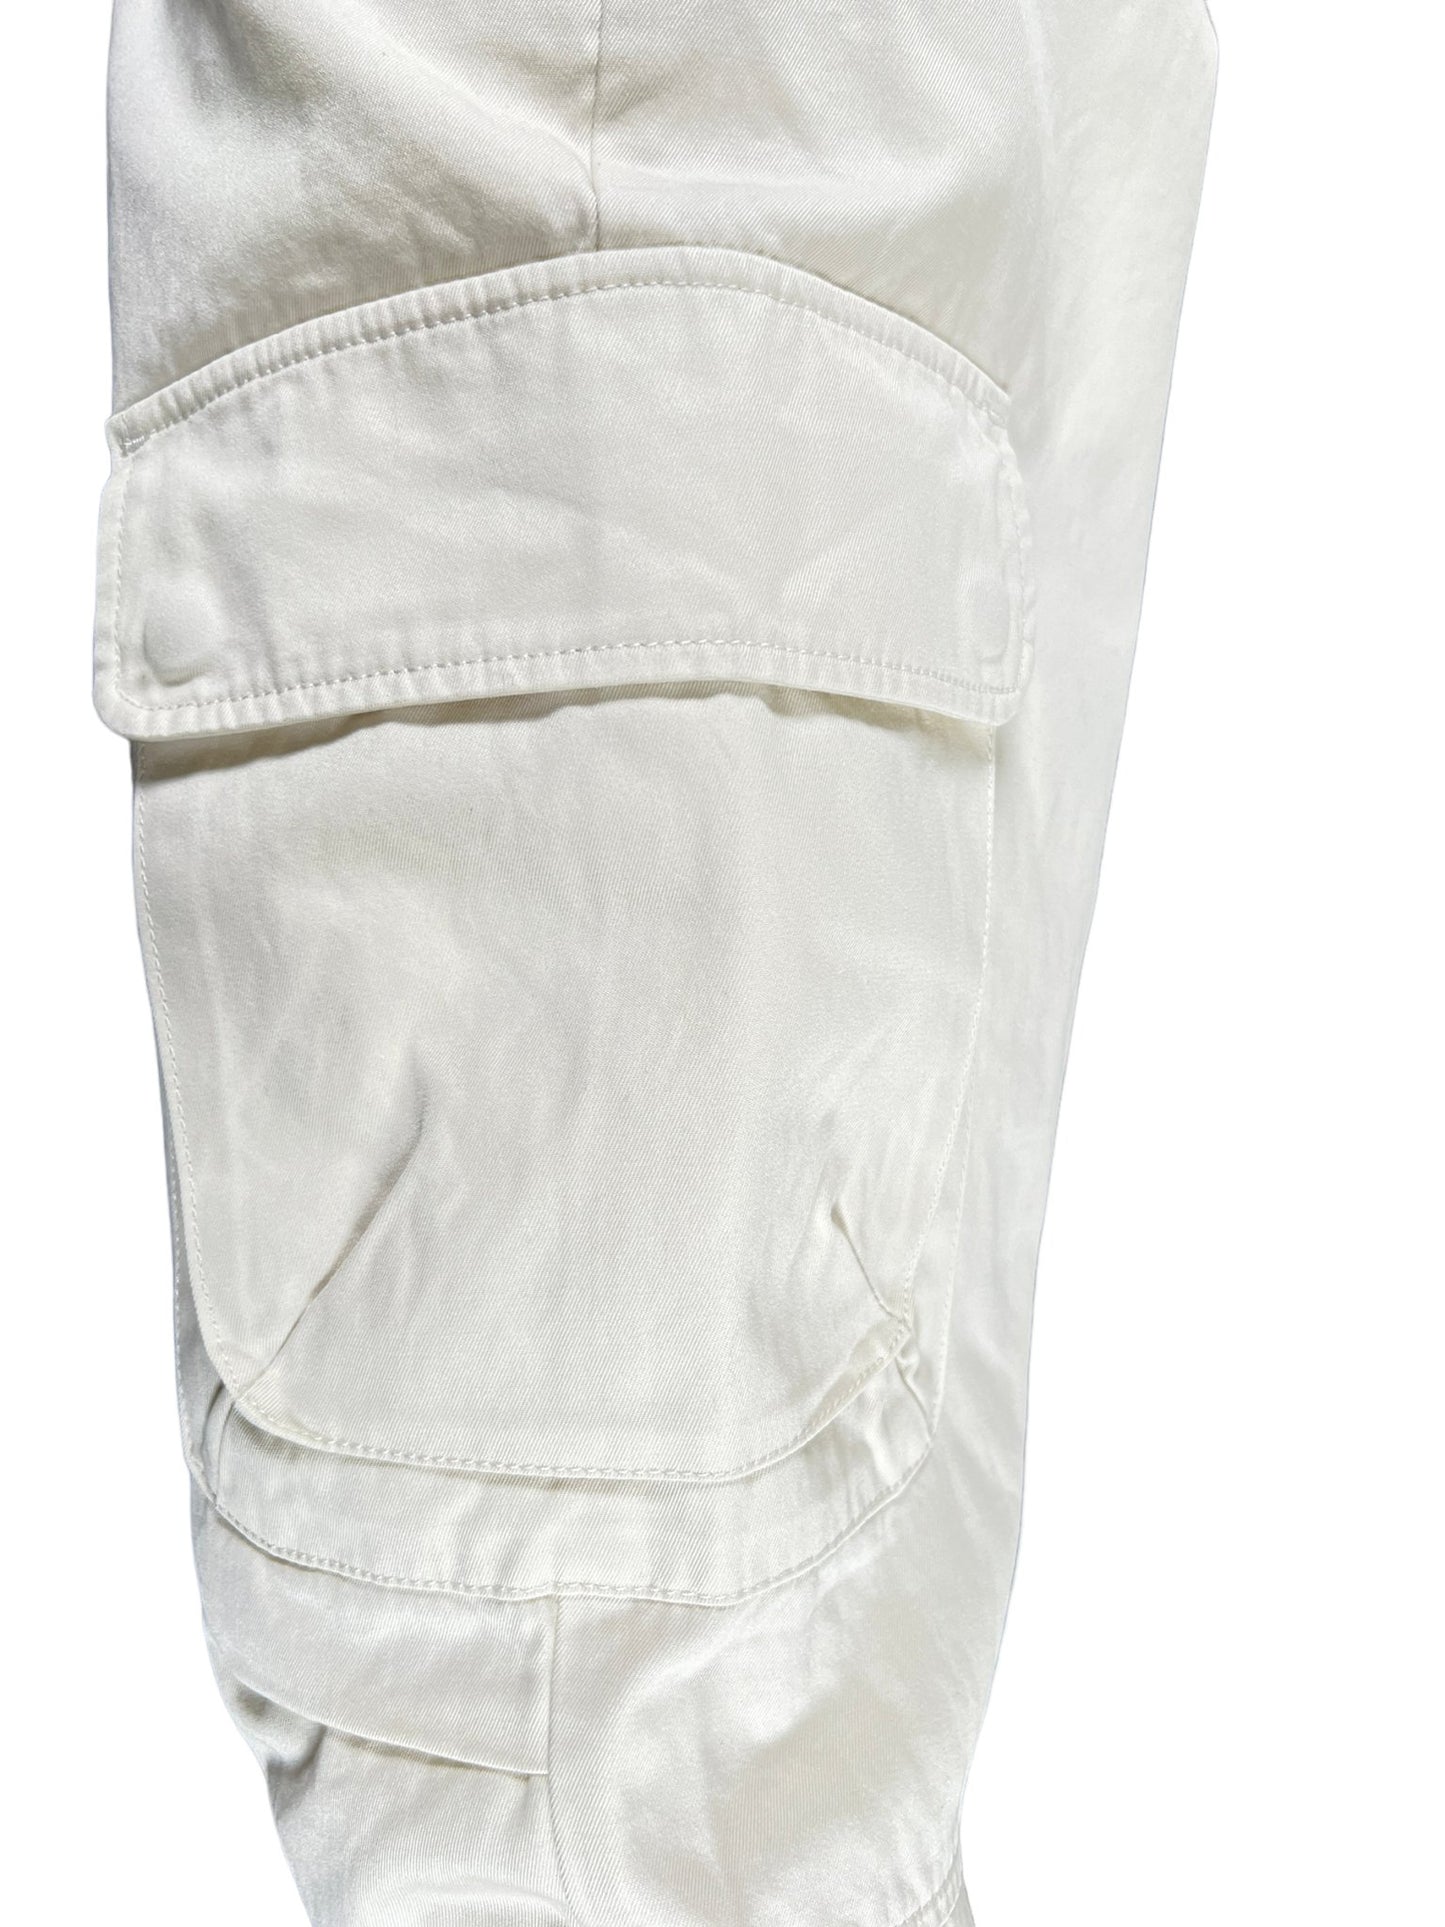 A pair of white Diesel P-Argym cargo pants with cargo pockets on a white background.